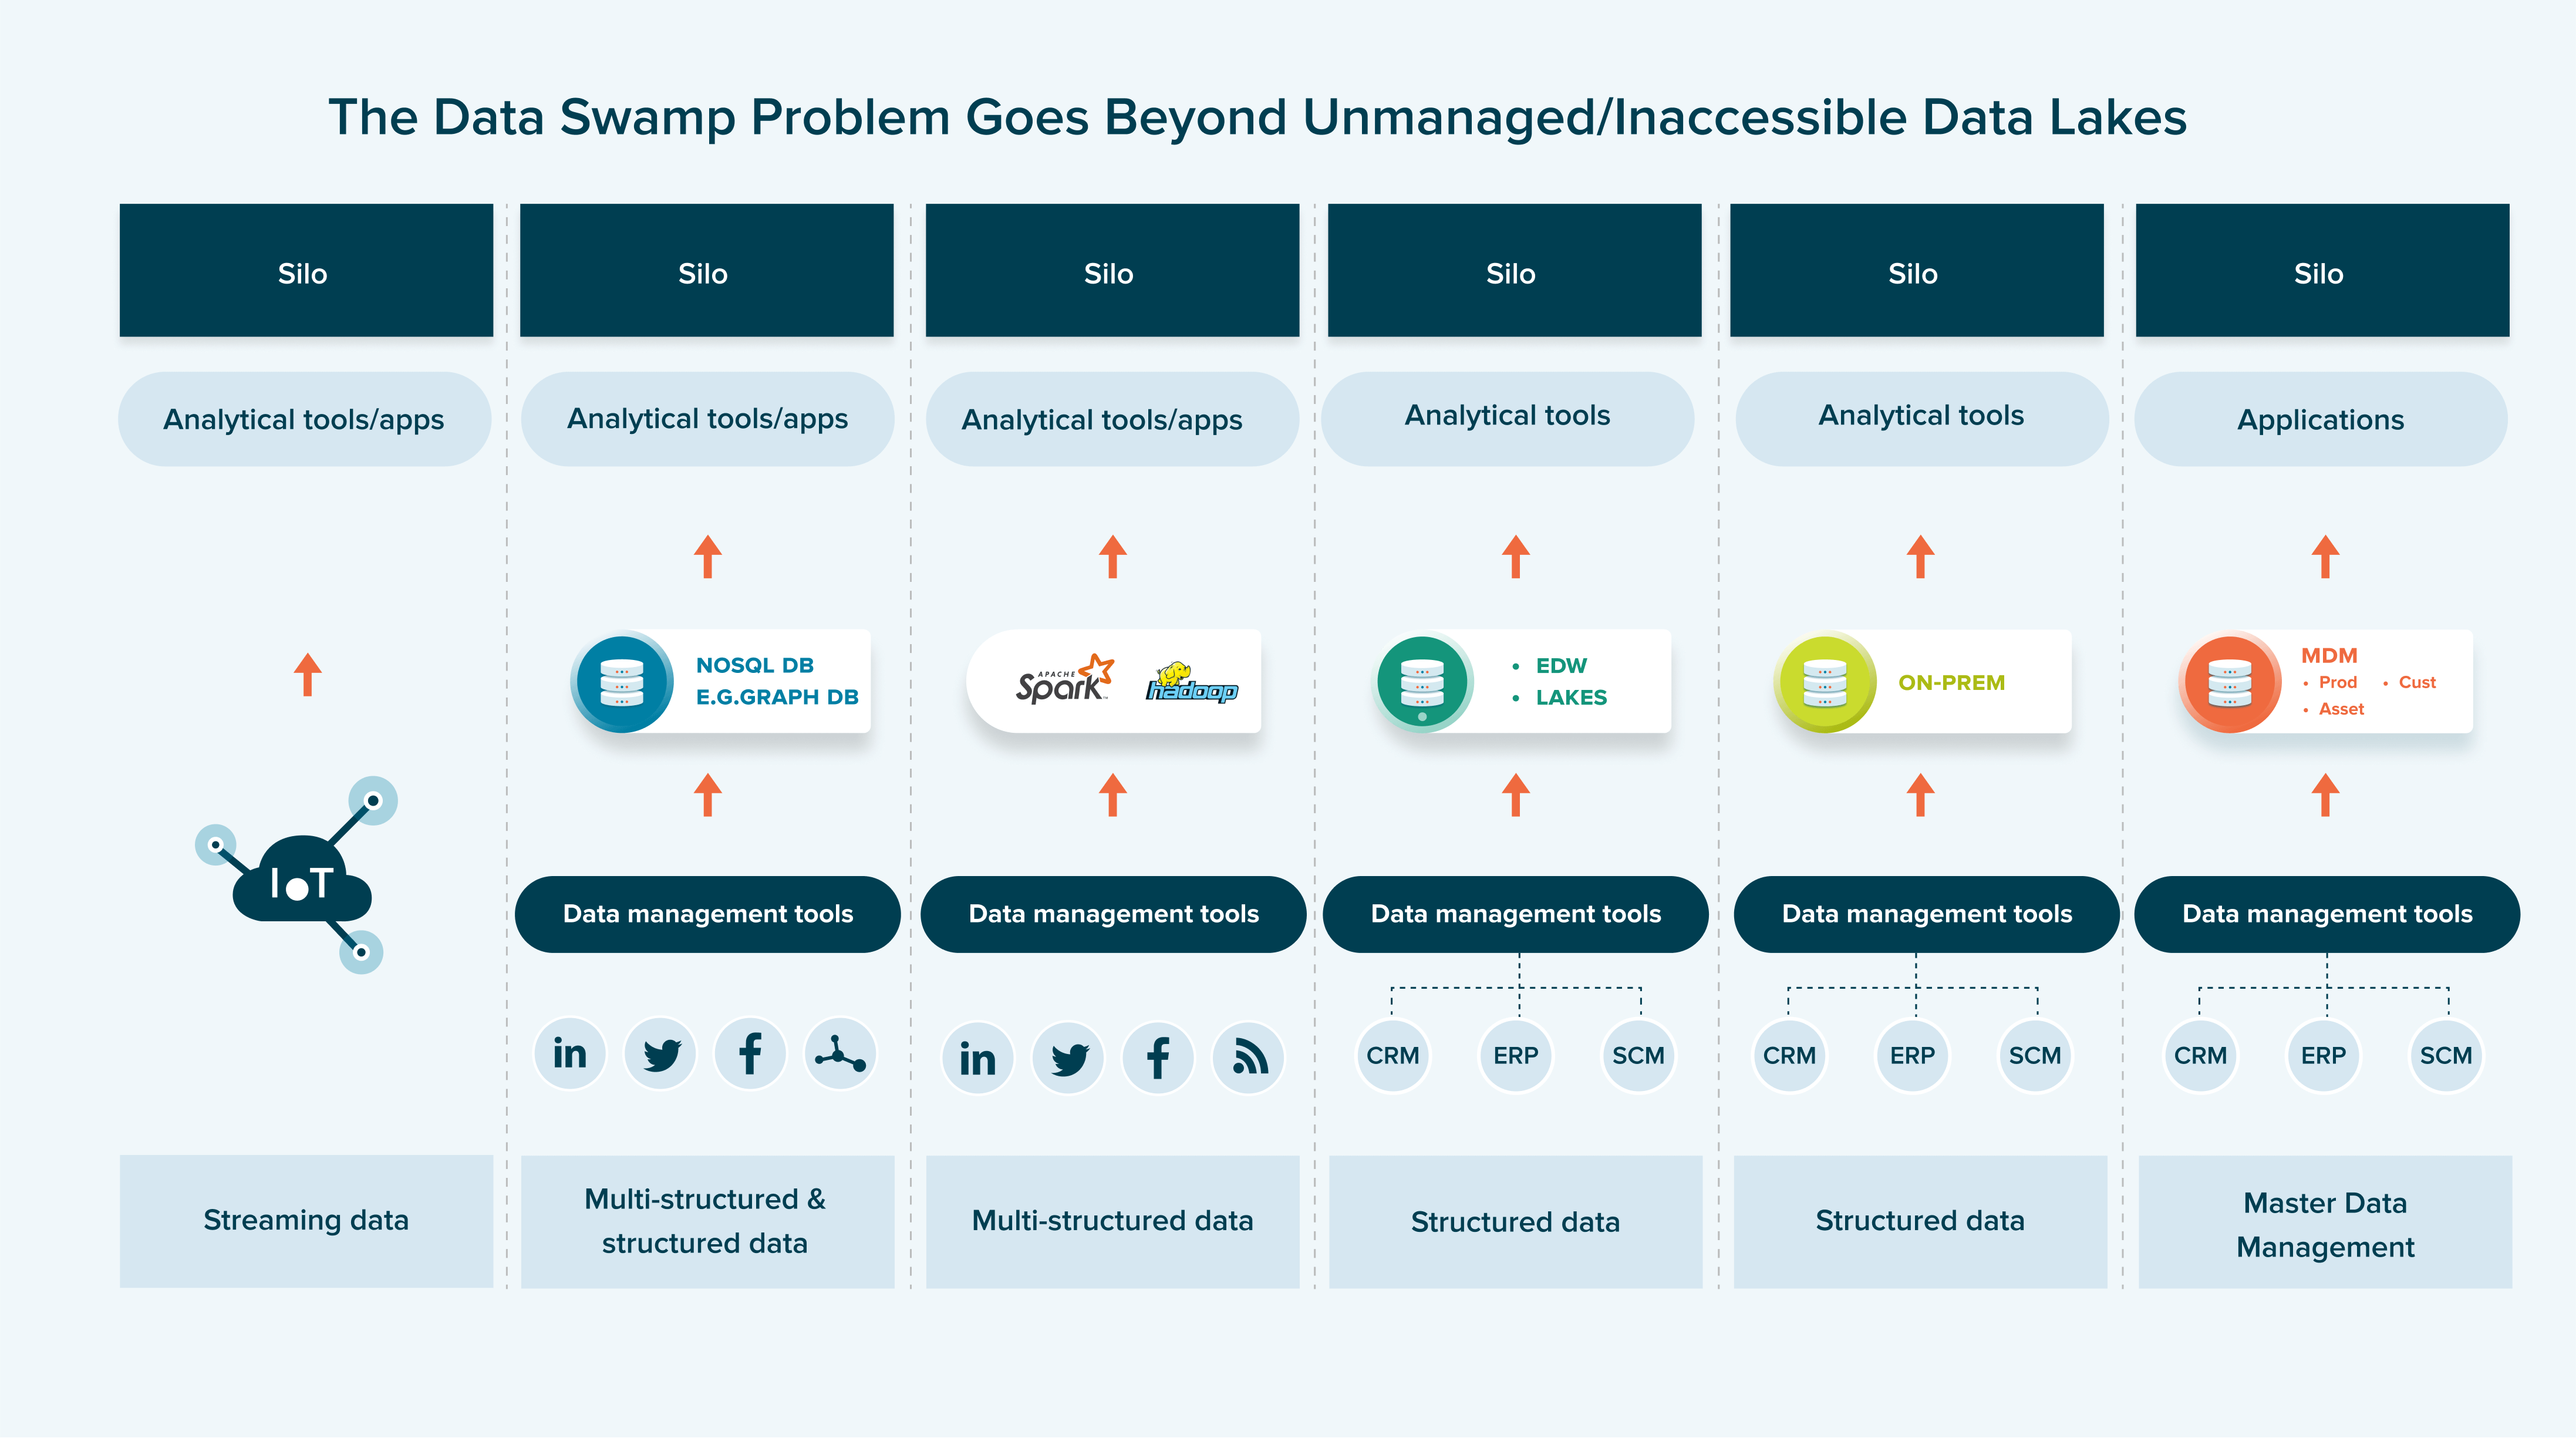 The data swamp problem goes beyond unmanaged/inaccessible data lakes